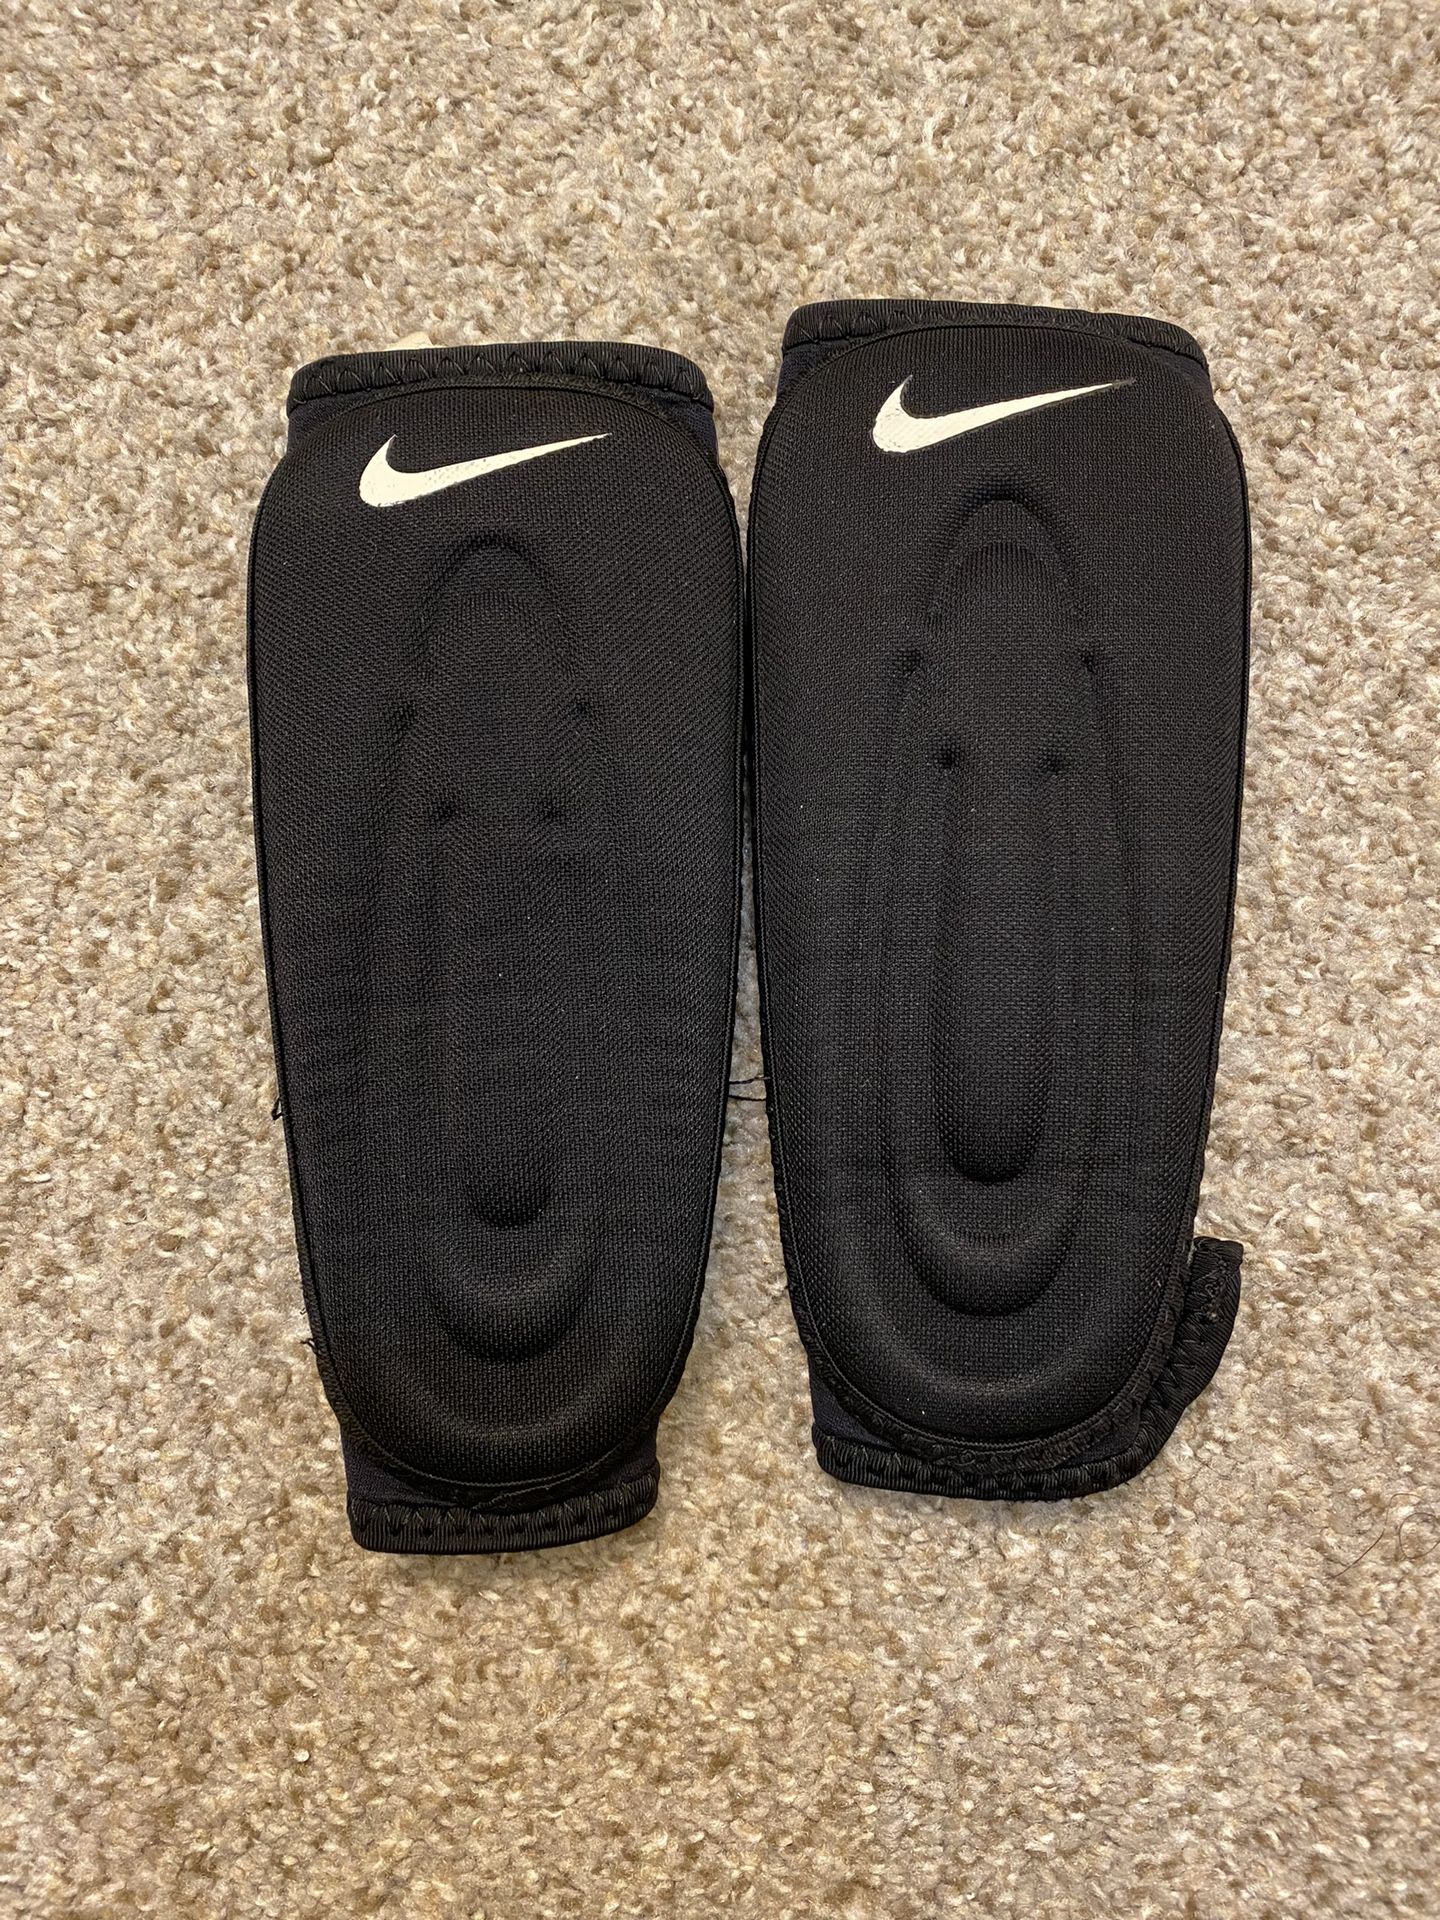 Nike Contact Support Football Forearm Protectors (with Grip)